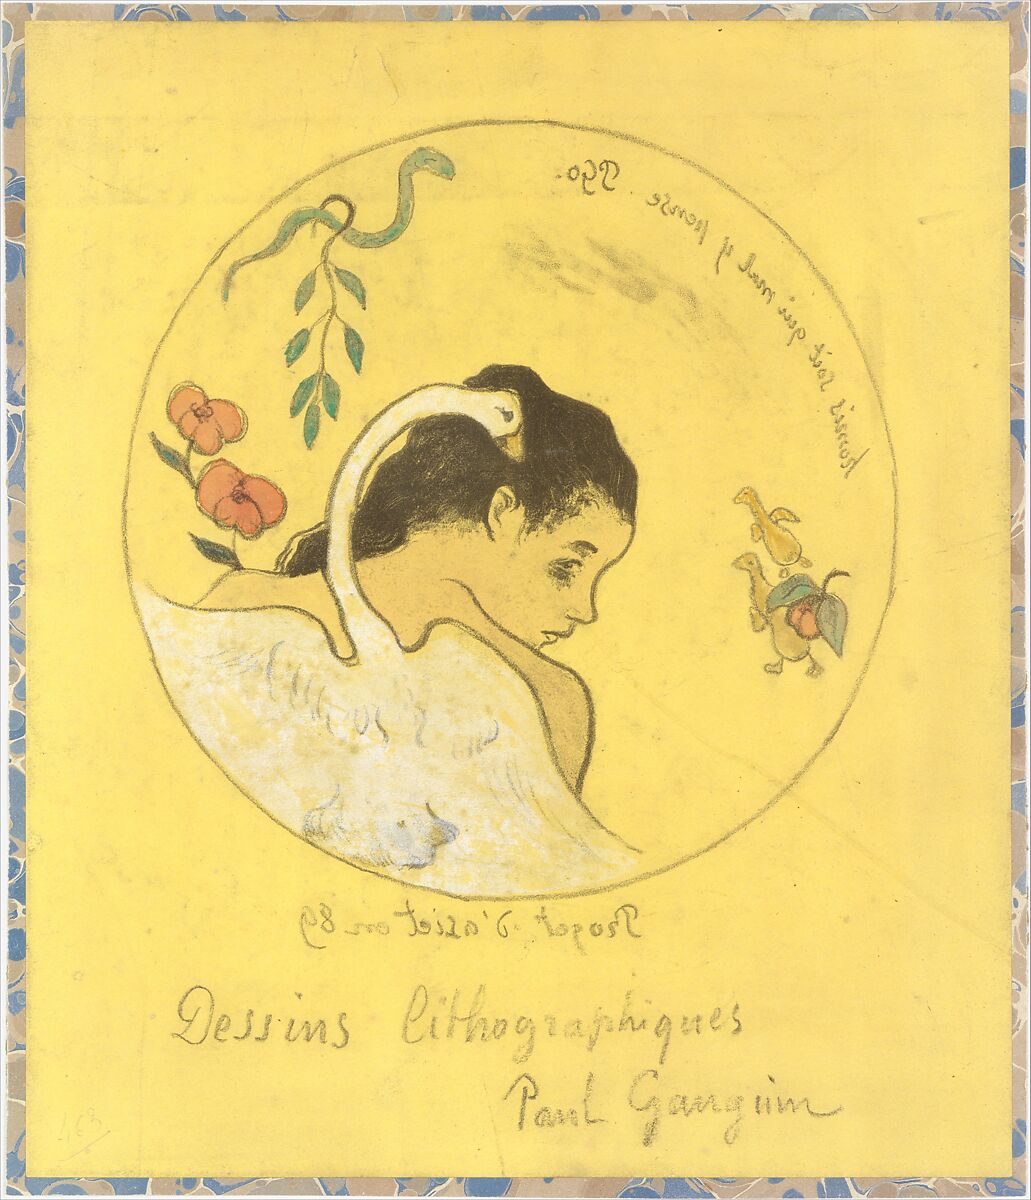 ("Leda") Design for a Plate: Shame on Those Who Evil Think (Honi Soit Qui Mal y Pense) ; cover illustration for the "Volpini Suite" entitled Lithographic Drawings (Dessins lithographiques), Paul Gauguin  French, Zincograph, colored by hand with watercolor and gouache on chrome yellow wove paper; mounted on marbled paper applied to millboard (cover of print portfolio, trimmed)